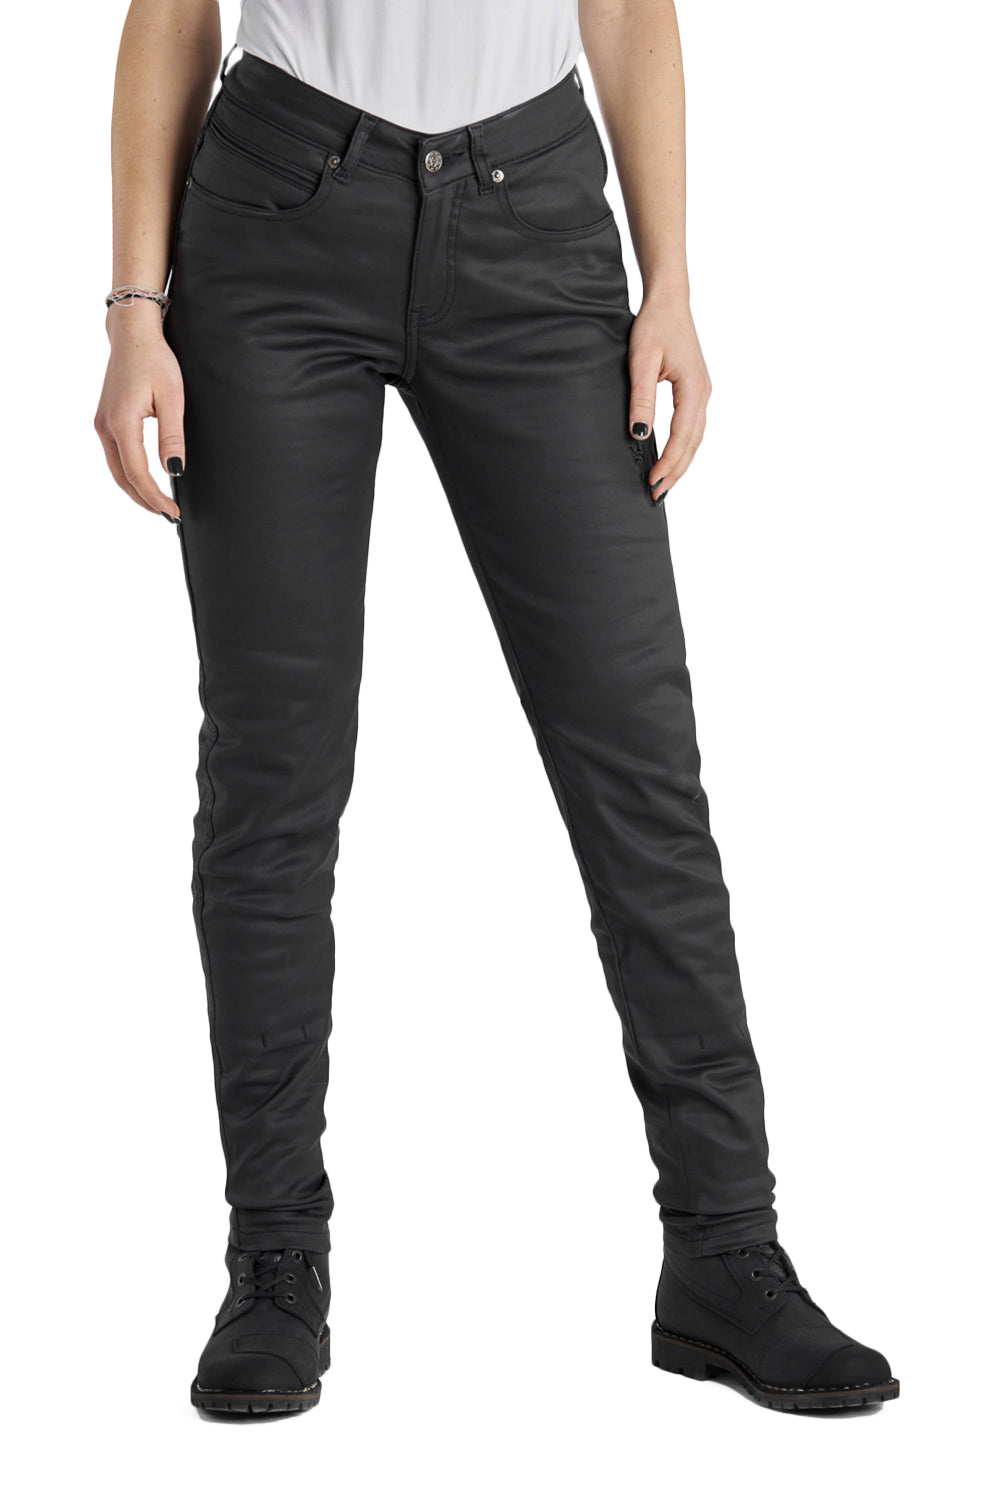 Augusta Moto Pant and Capri – Do It Better Yourself Club